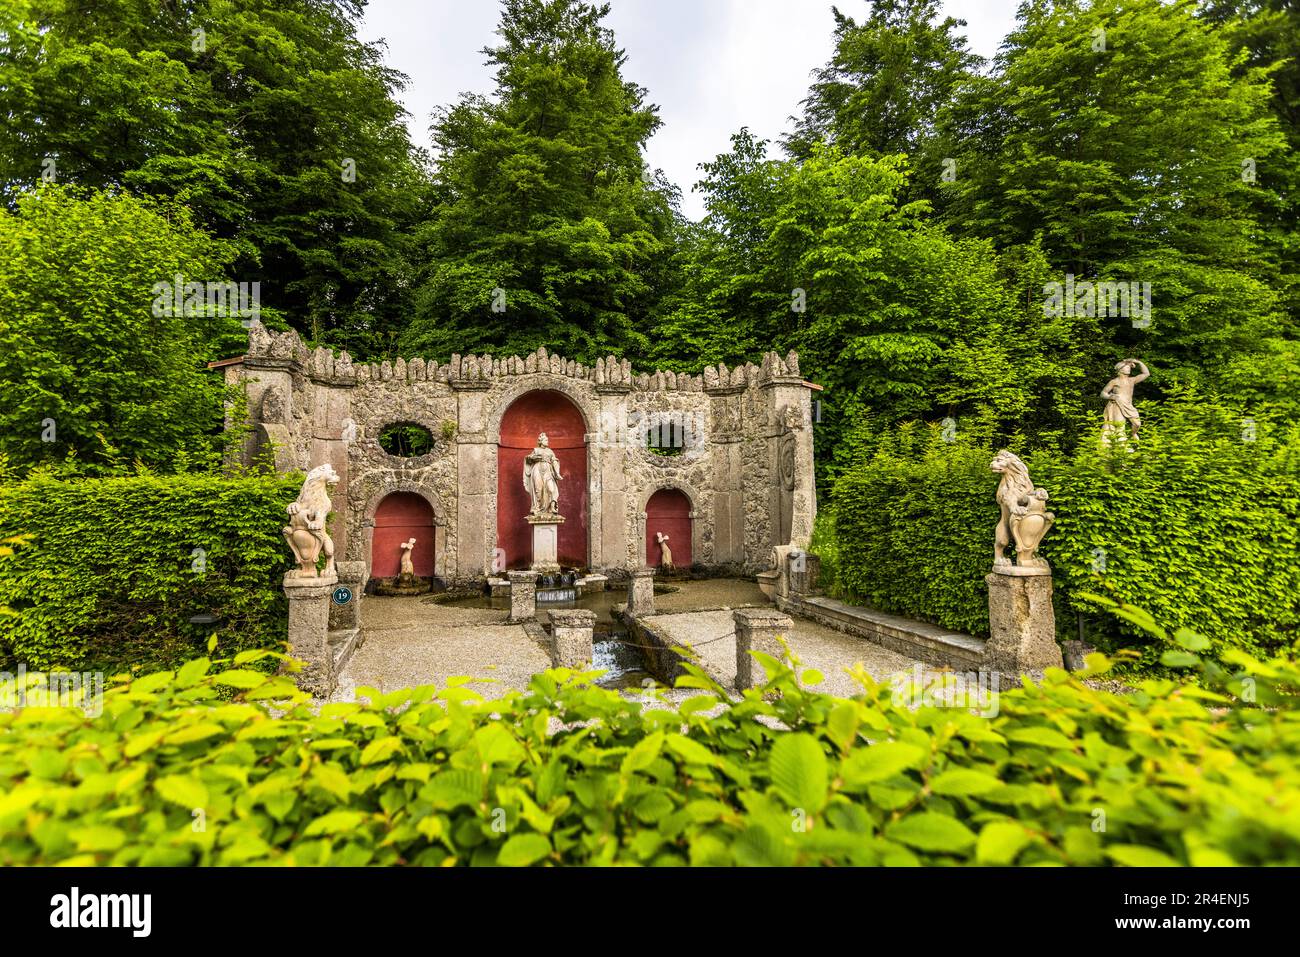 The Eurydice Fountain is part of the fountains of Hellbrunn Palace in Salzburg, Austria Stock Photo